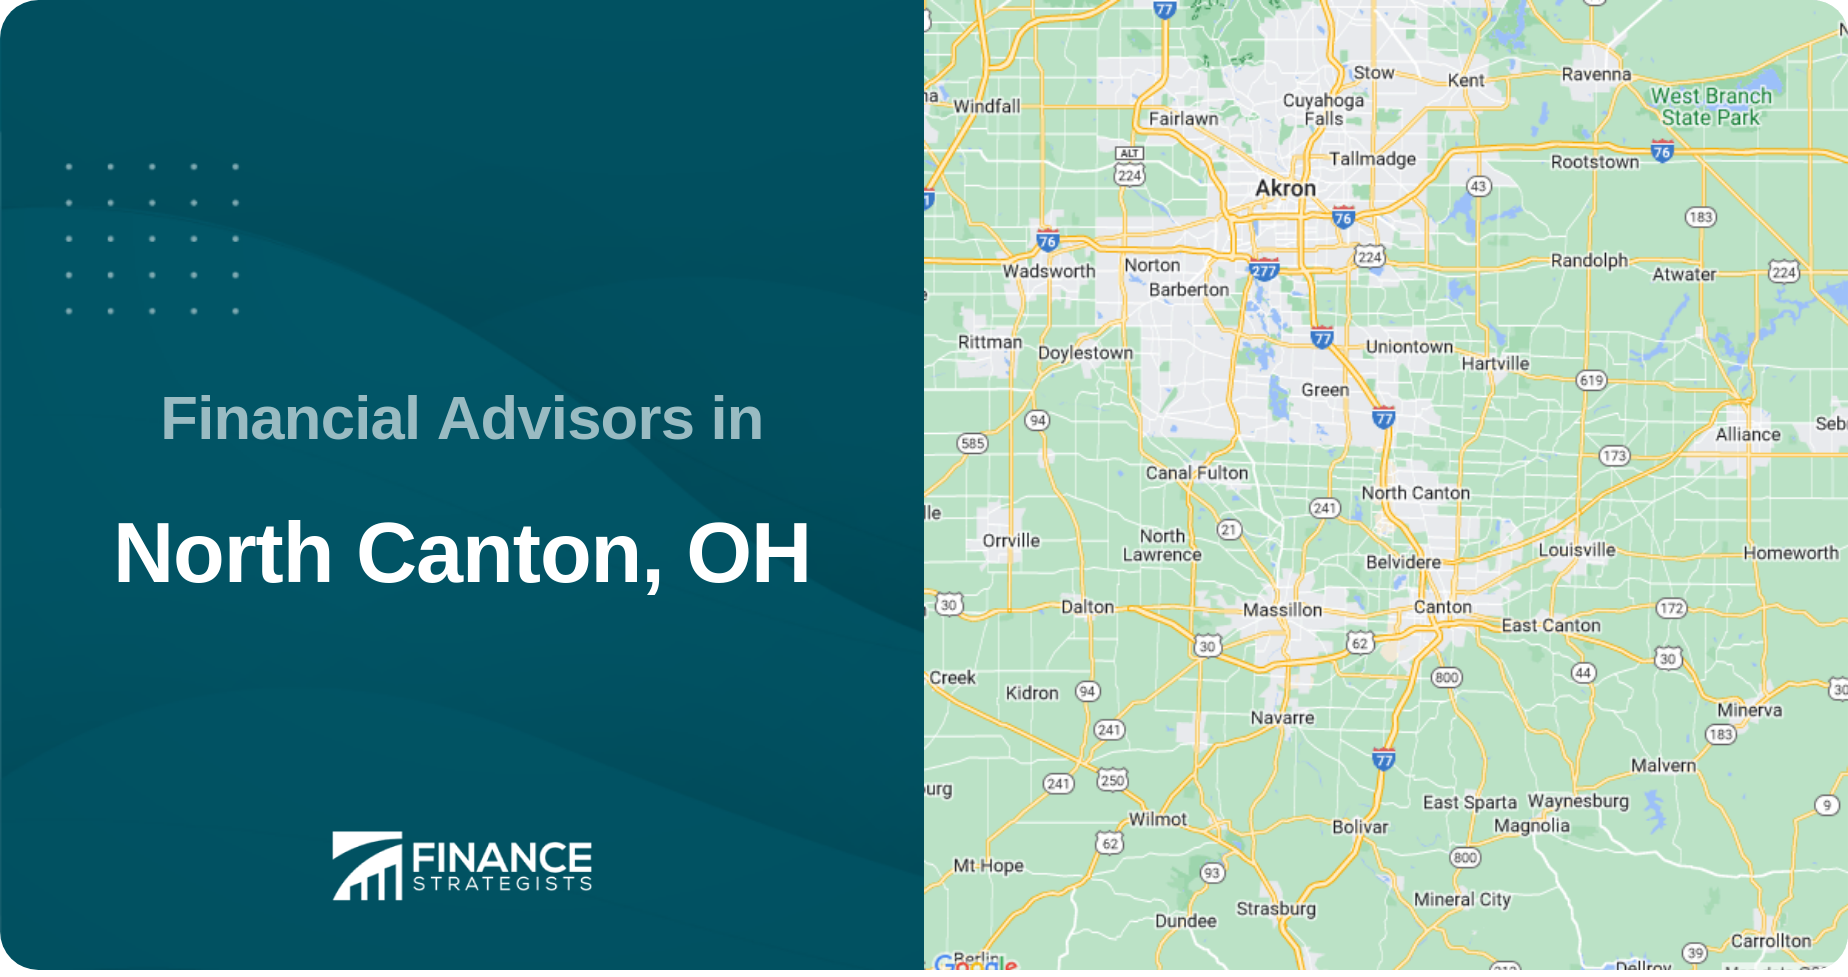 Financial Advisors in North Canton, OH